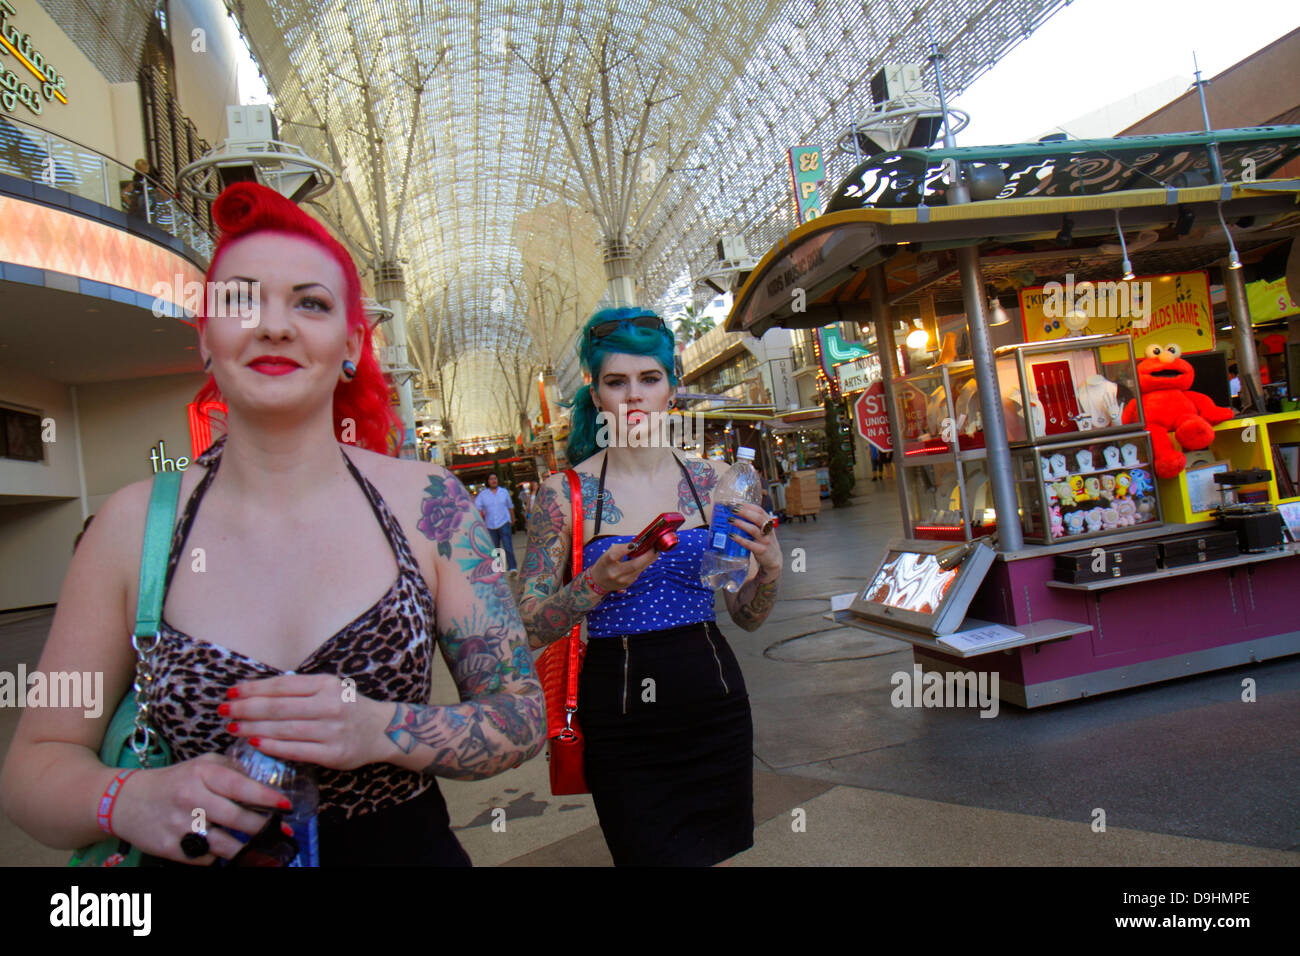 Las Vegas Nevada,Downtown,Fremont Street Experience,pedestrian mall arcade,adult adults woman women female lady,dyed hair,red,blue,tattoos,retro look, Stock Photo